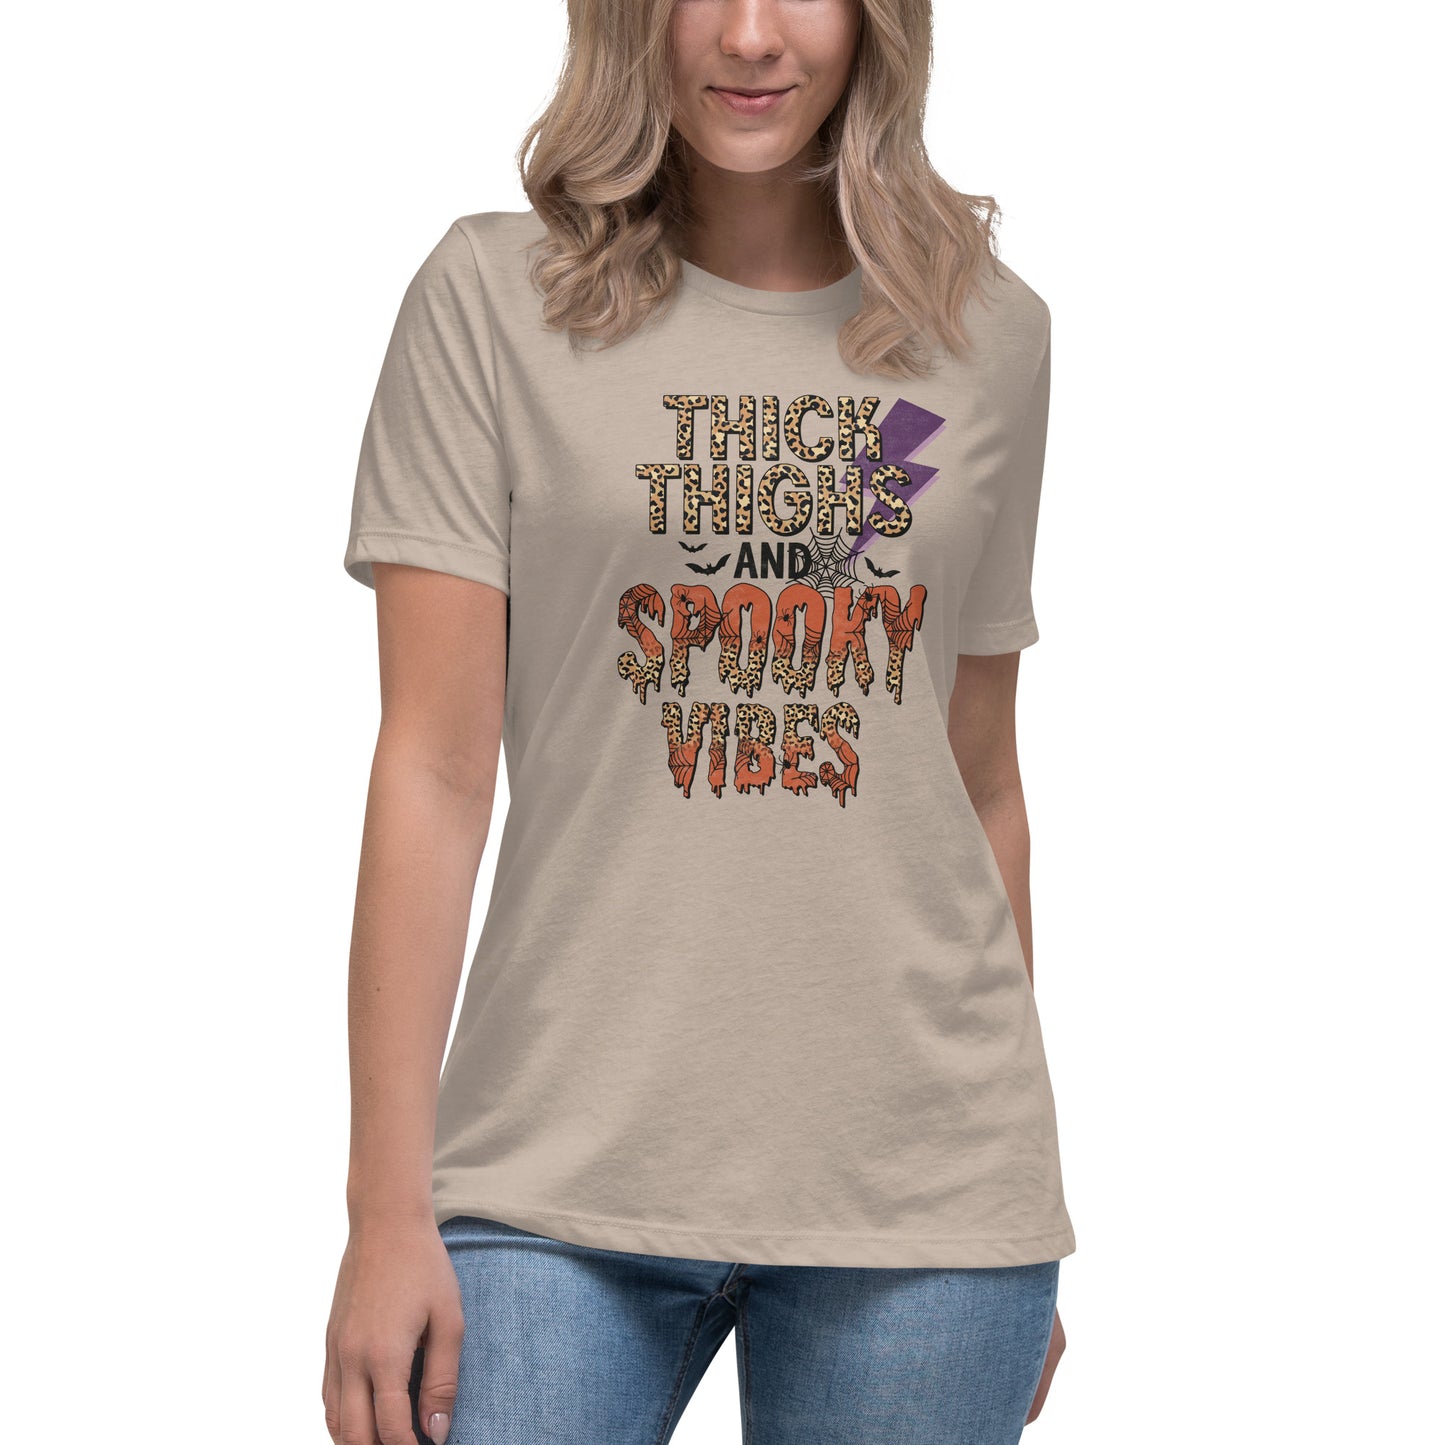 Thick Thighs Spooky Vibes Women's Relaxed T-Shirt Tee Tshirt